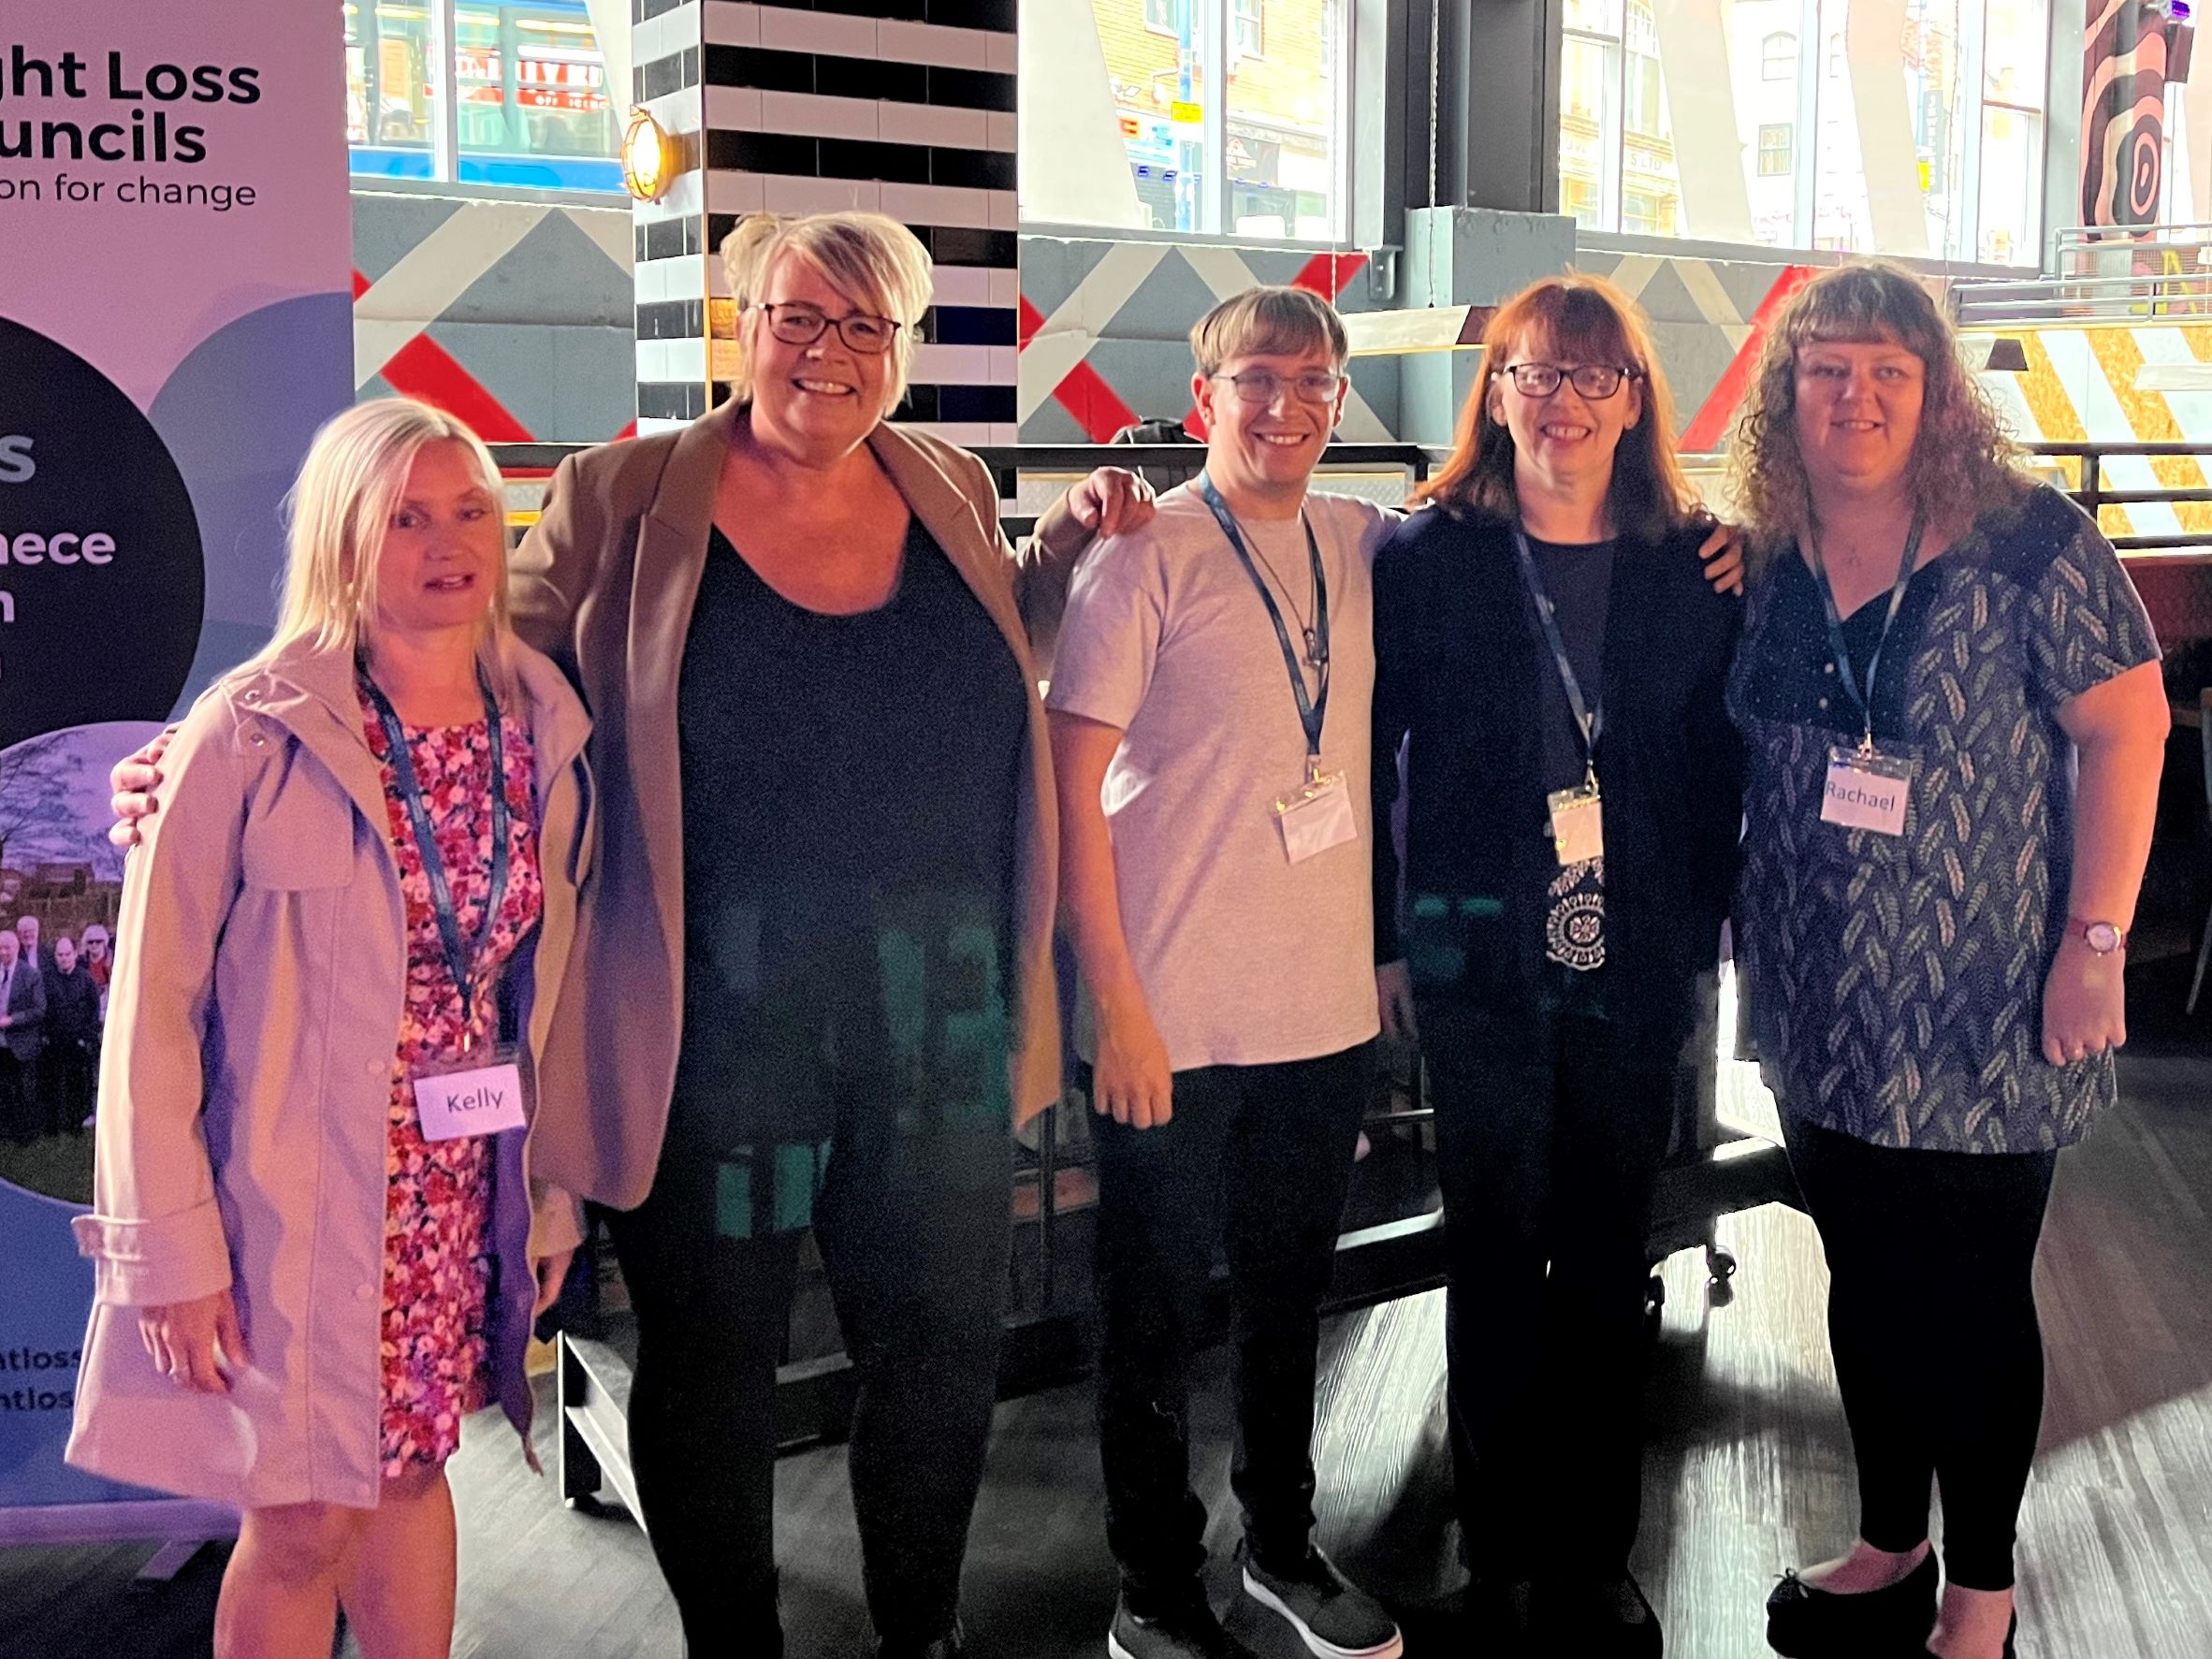 Engagement Manager Kelly Barton with members of the Sight Loss Council and Debs from the Marketing Team at the Arndale Centre. They are stood in a line smiling at the camera.